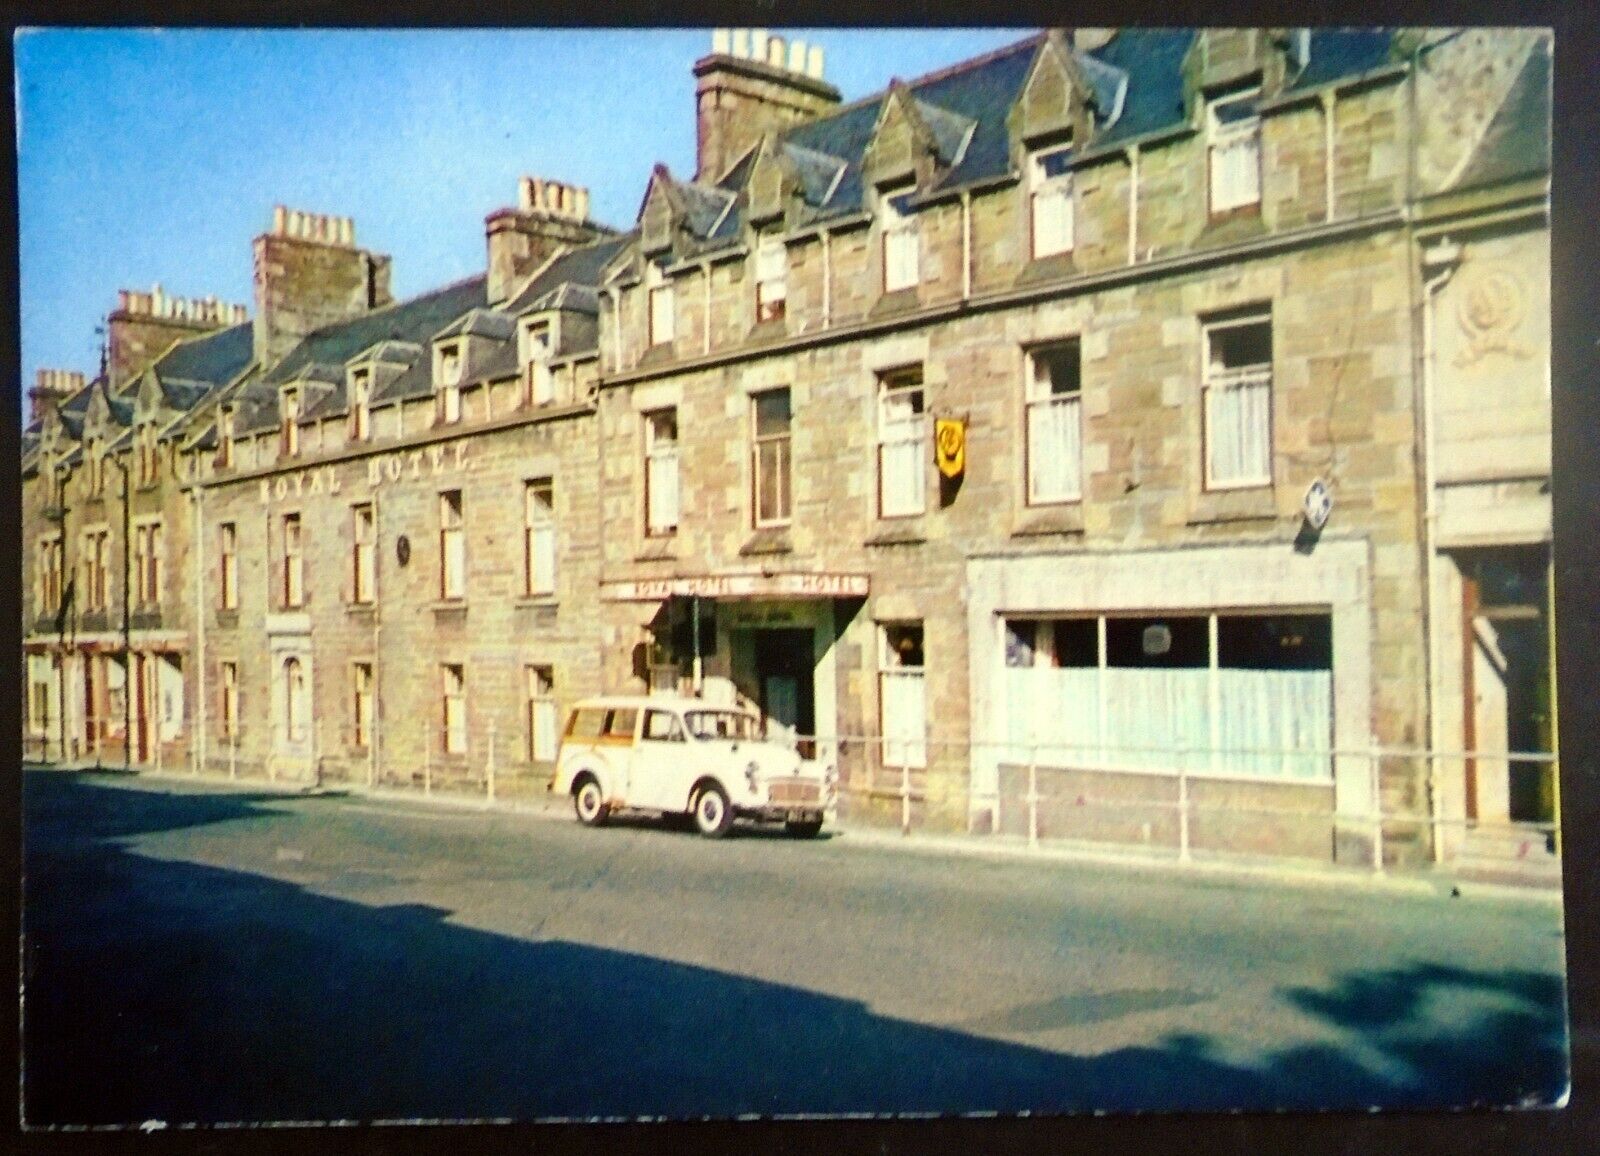 View of the Royal Hotel, Delivery Truck, Center of Thurso, Caithness, Scotland